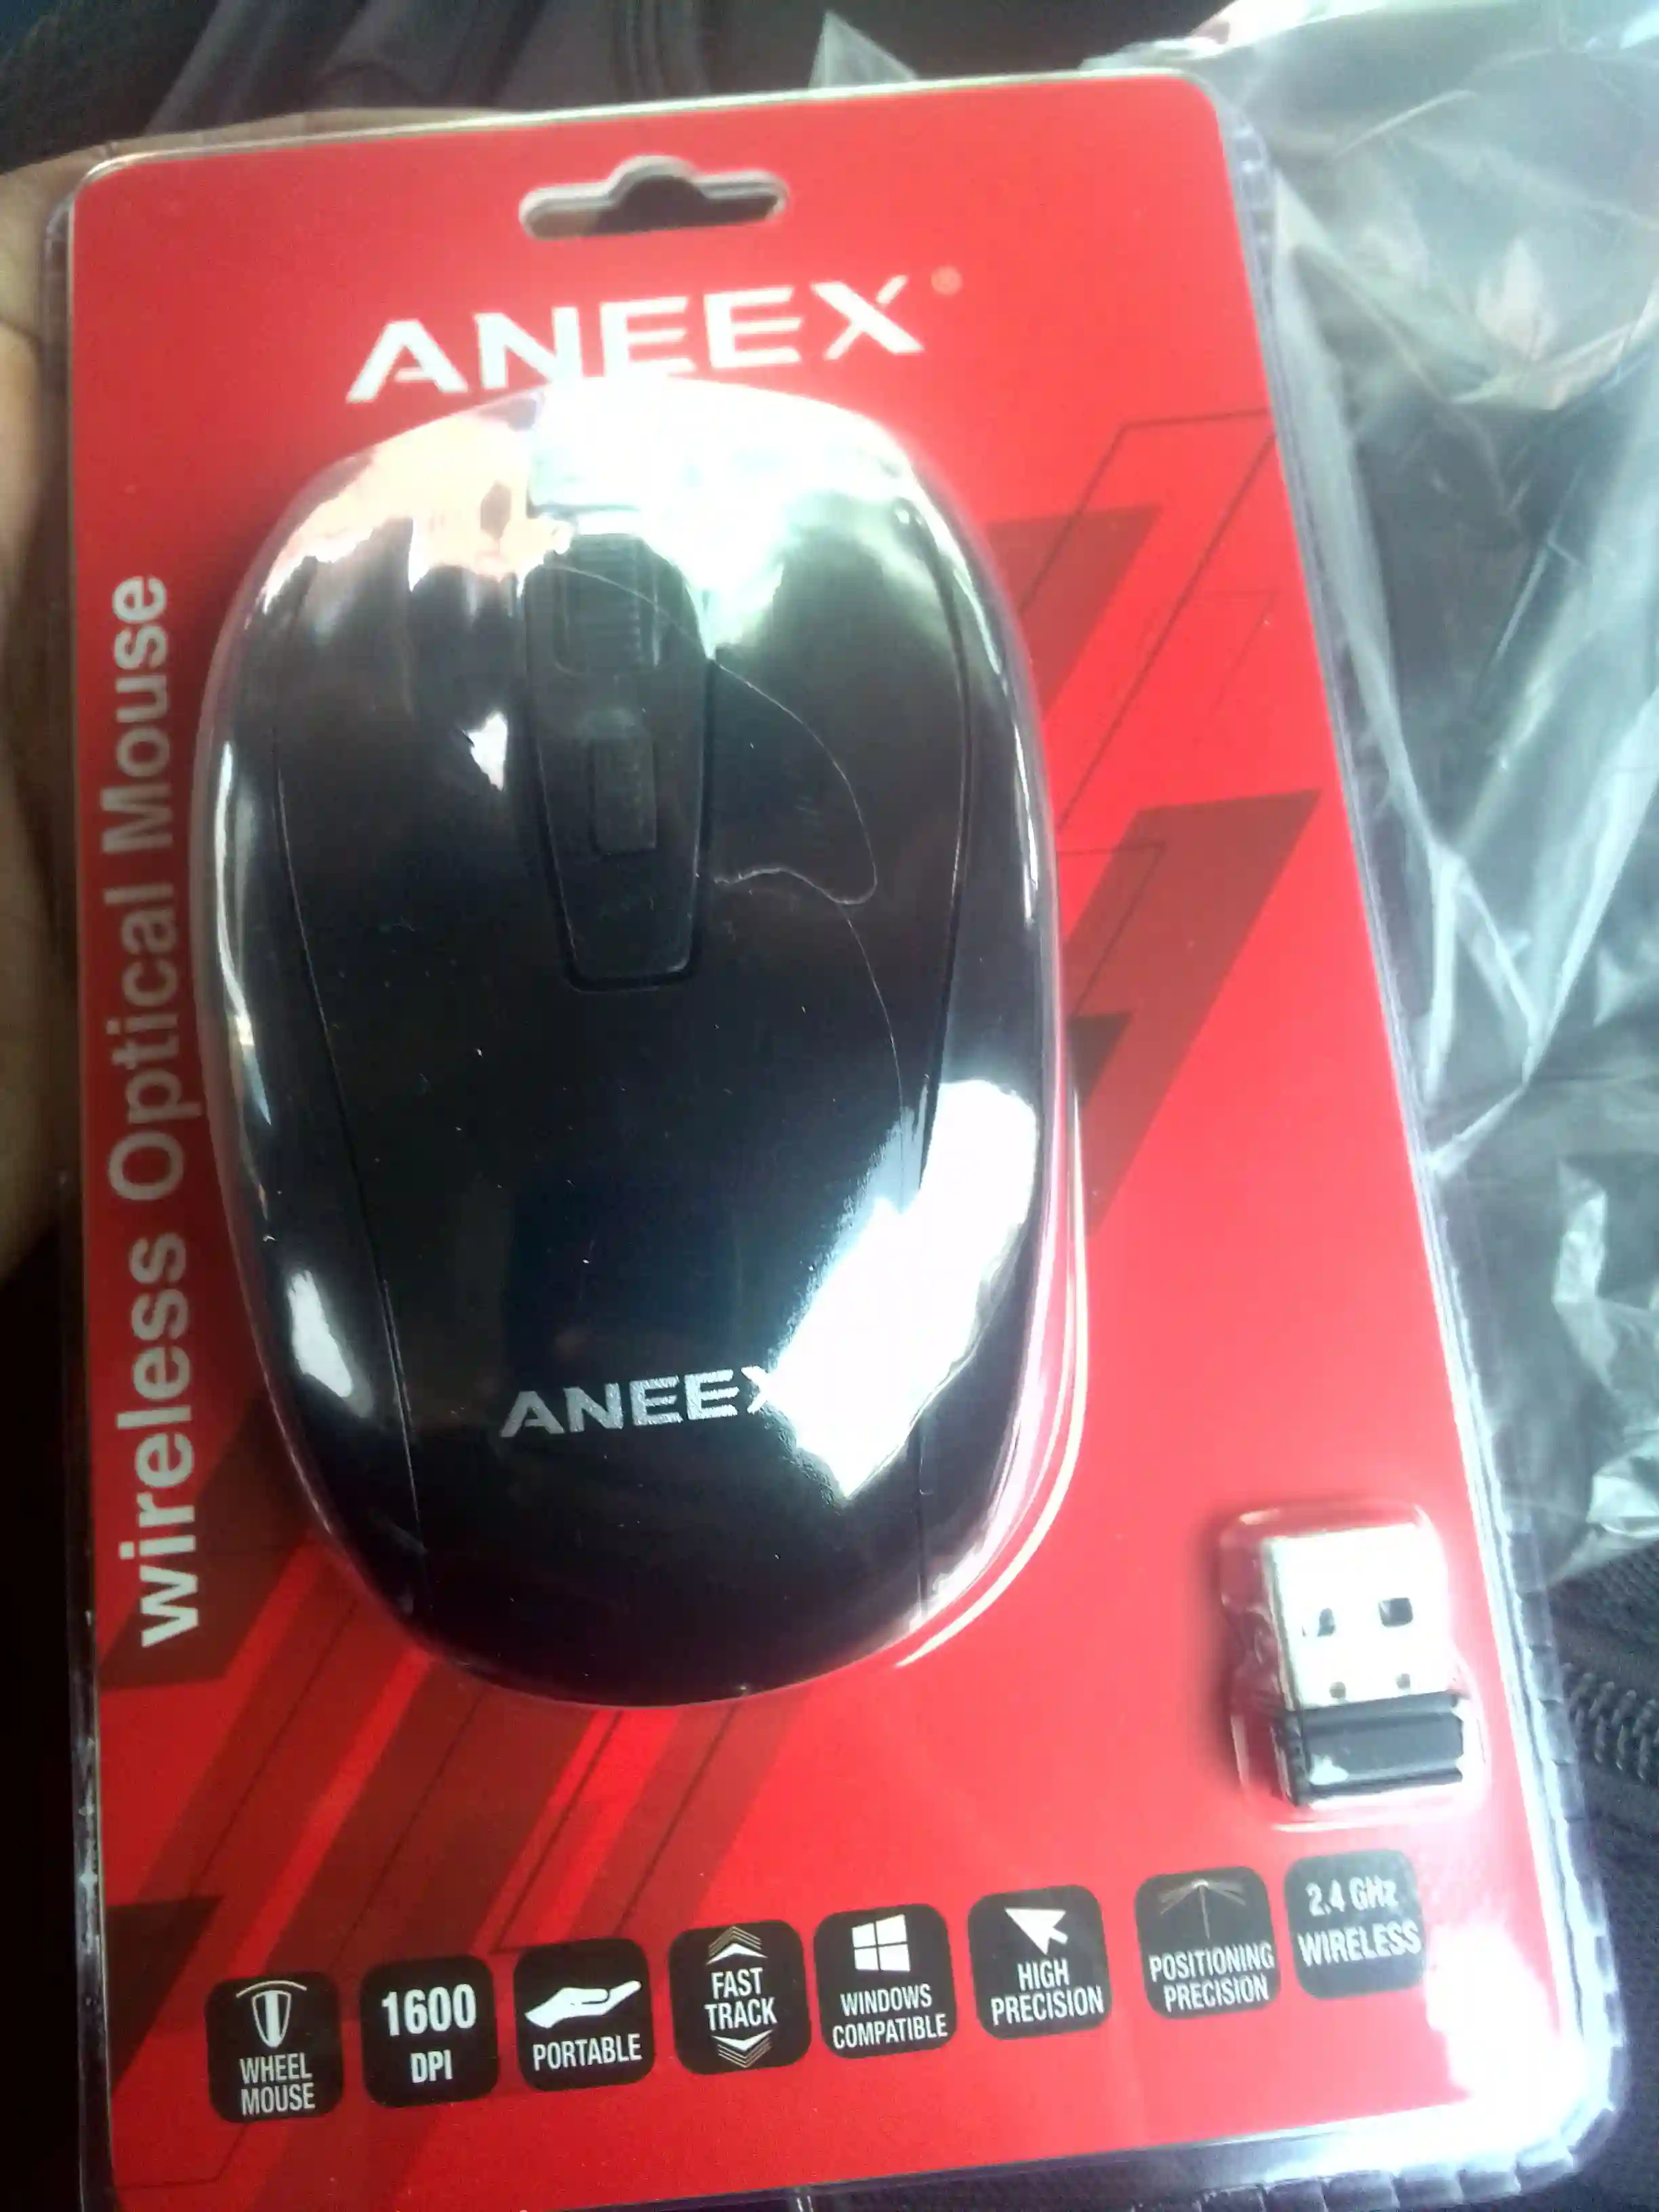 ANEEX Wireless Mouse